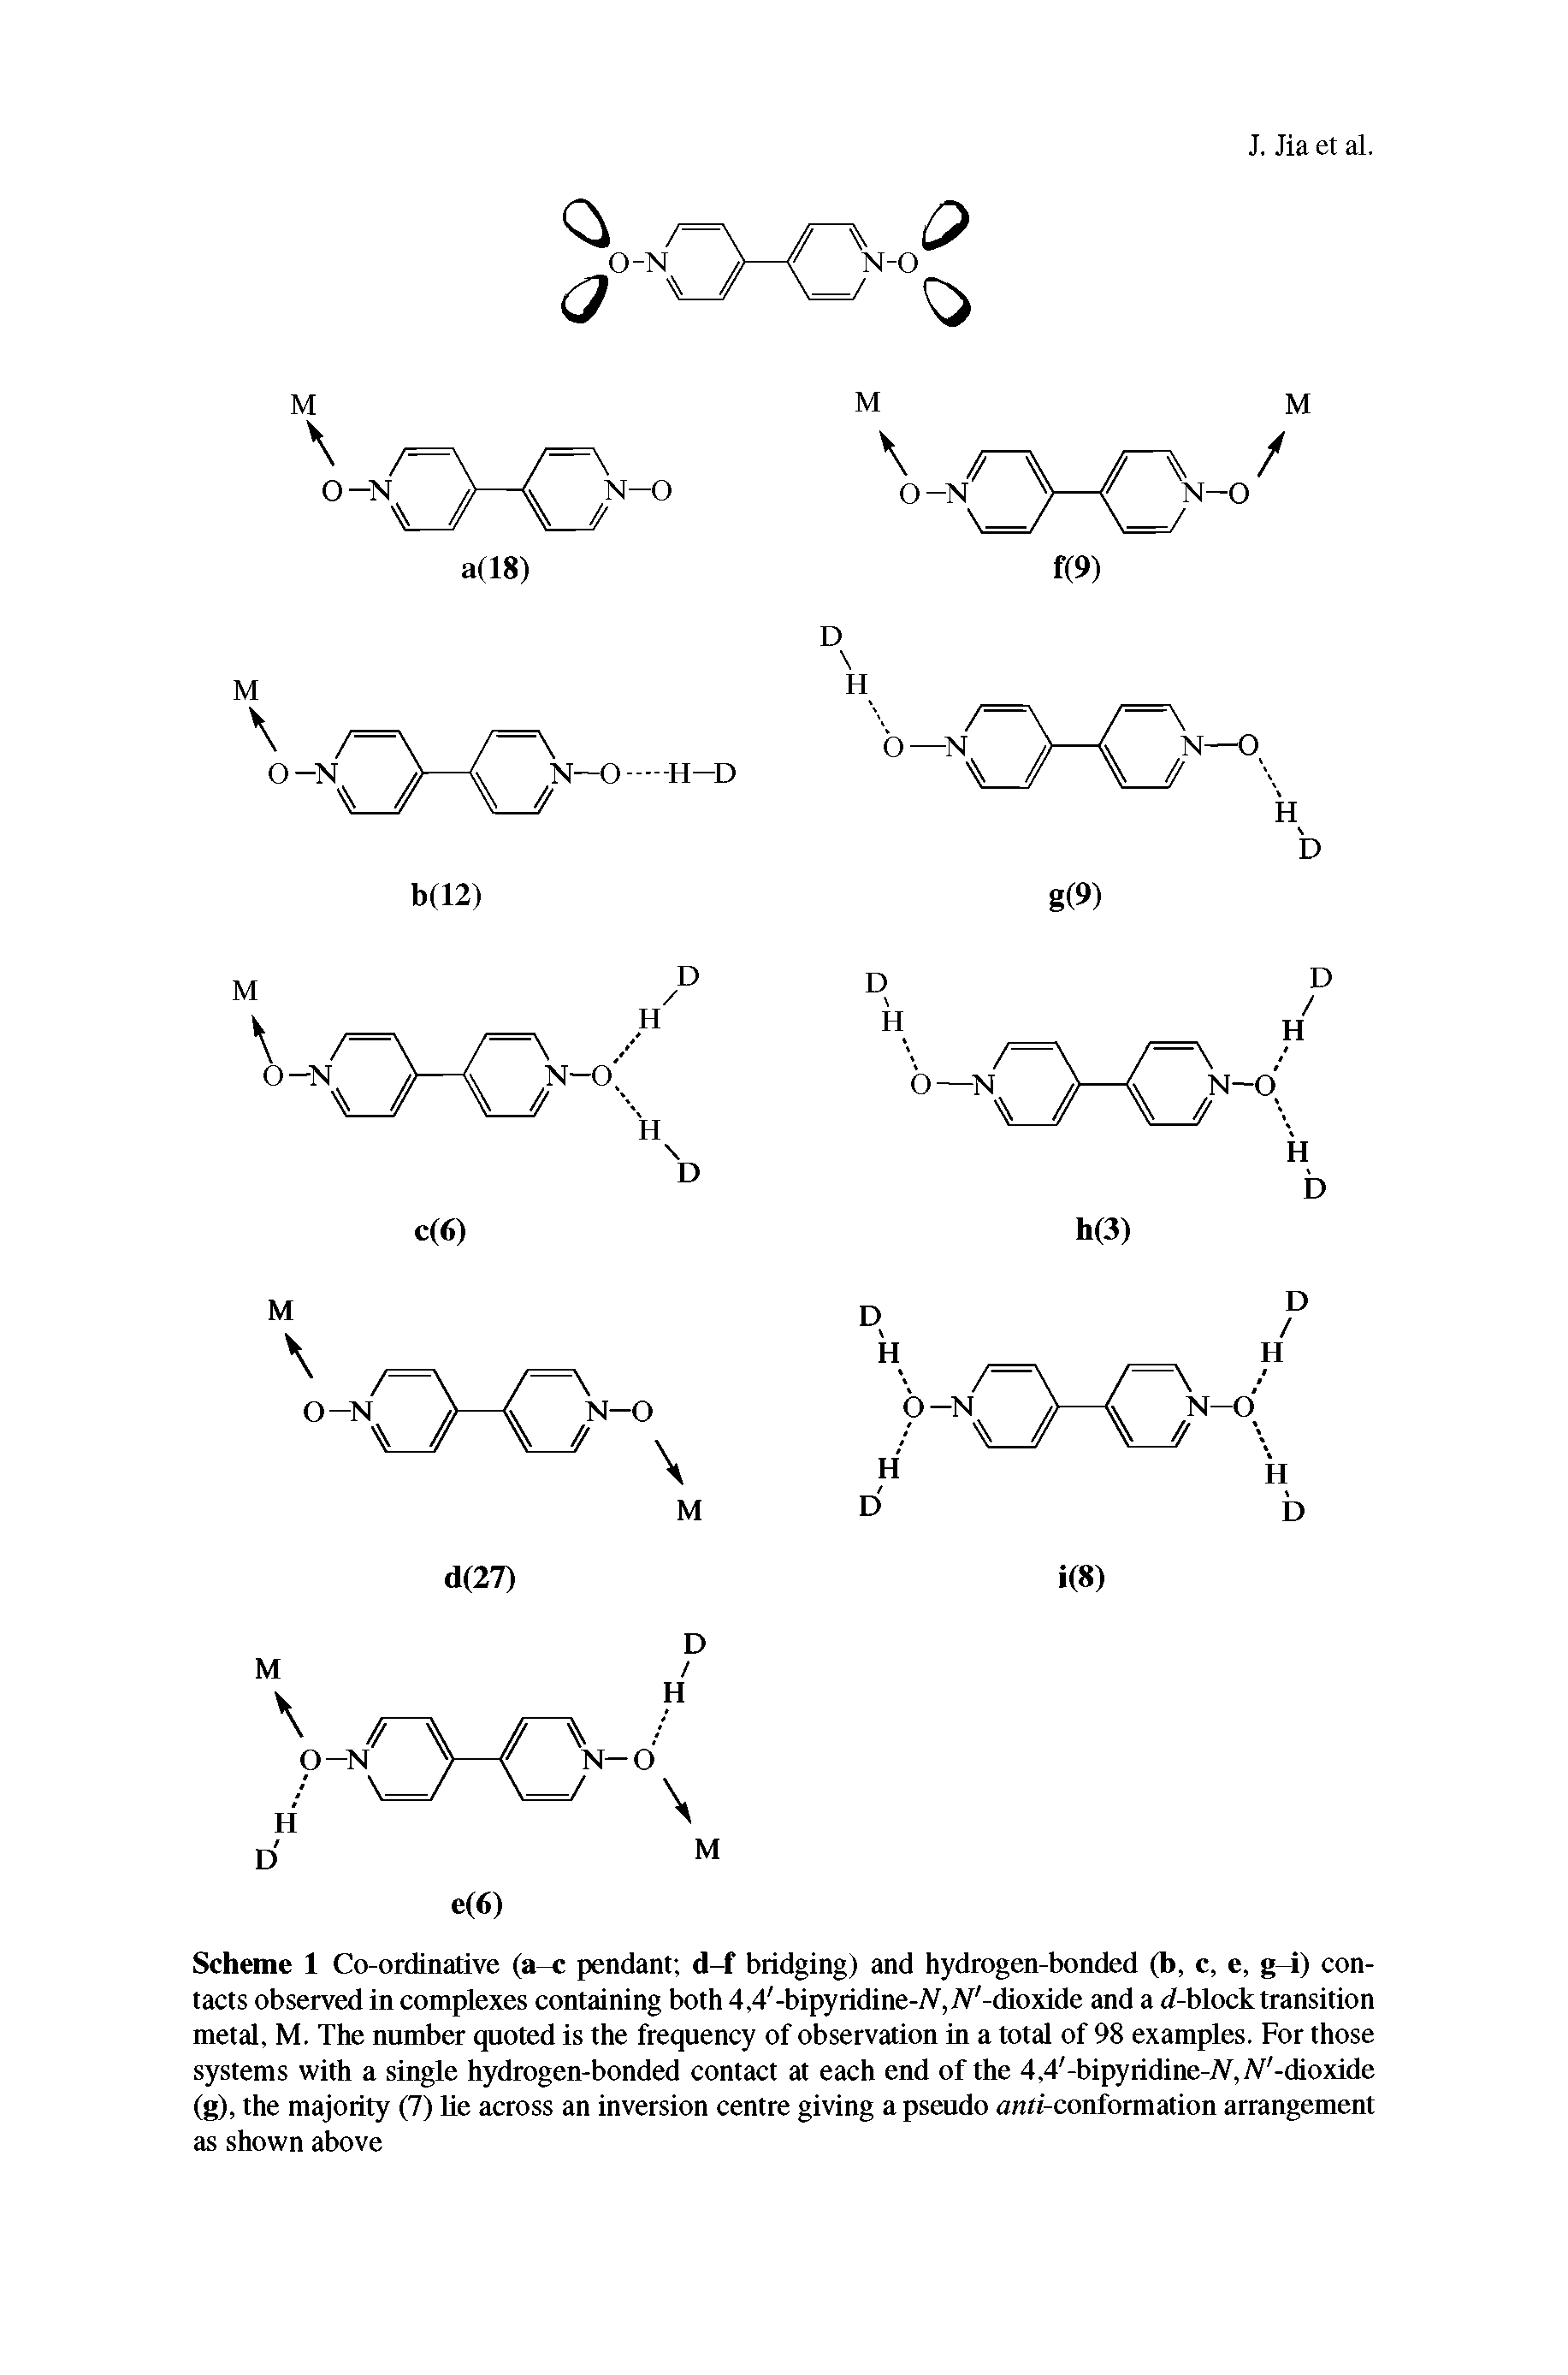 Scheme 1 Co-ordinative (a pendant d-f bridging) and hydrogen-bonded (b, c, e, g-i) contacts observed in complexes containing both 4,4 -bipyridine-)V,lV -dioxide and a </-block transition metal, M. The number quoted is the frequency of observation in a total of 98 examples. For those systems with a single hydrogen-bonded contact at each end of the 4,4 -bipyridine-lV,Af -dioxide (g), the majority (7) lie across an inversion centre giving a pseudo anri-conformation arrangement as shown above...